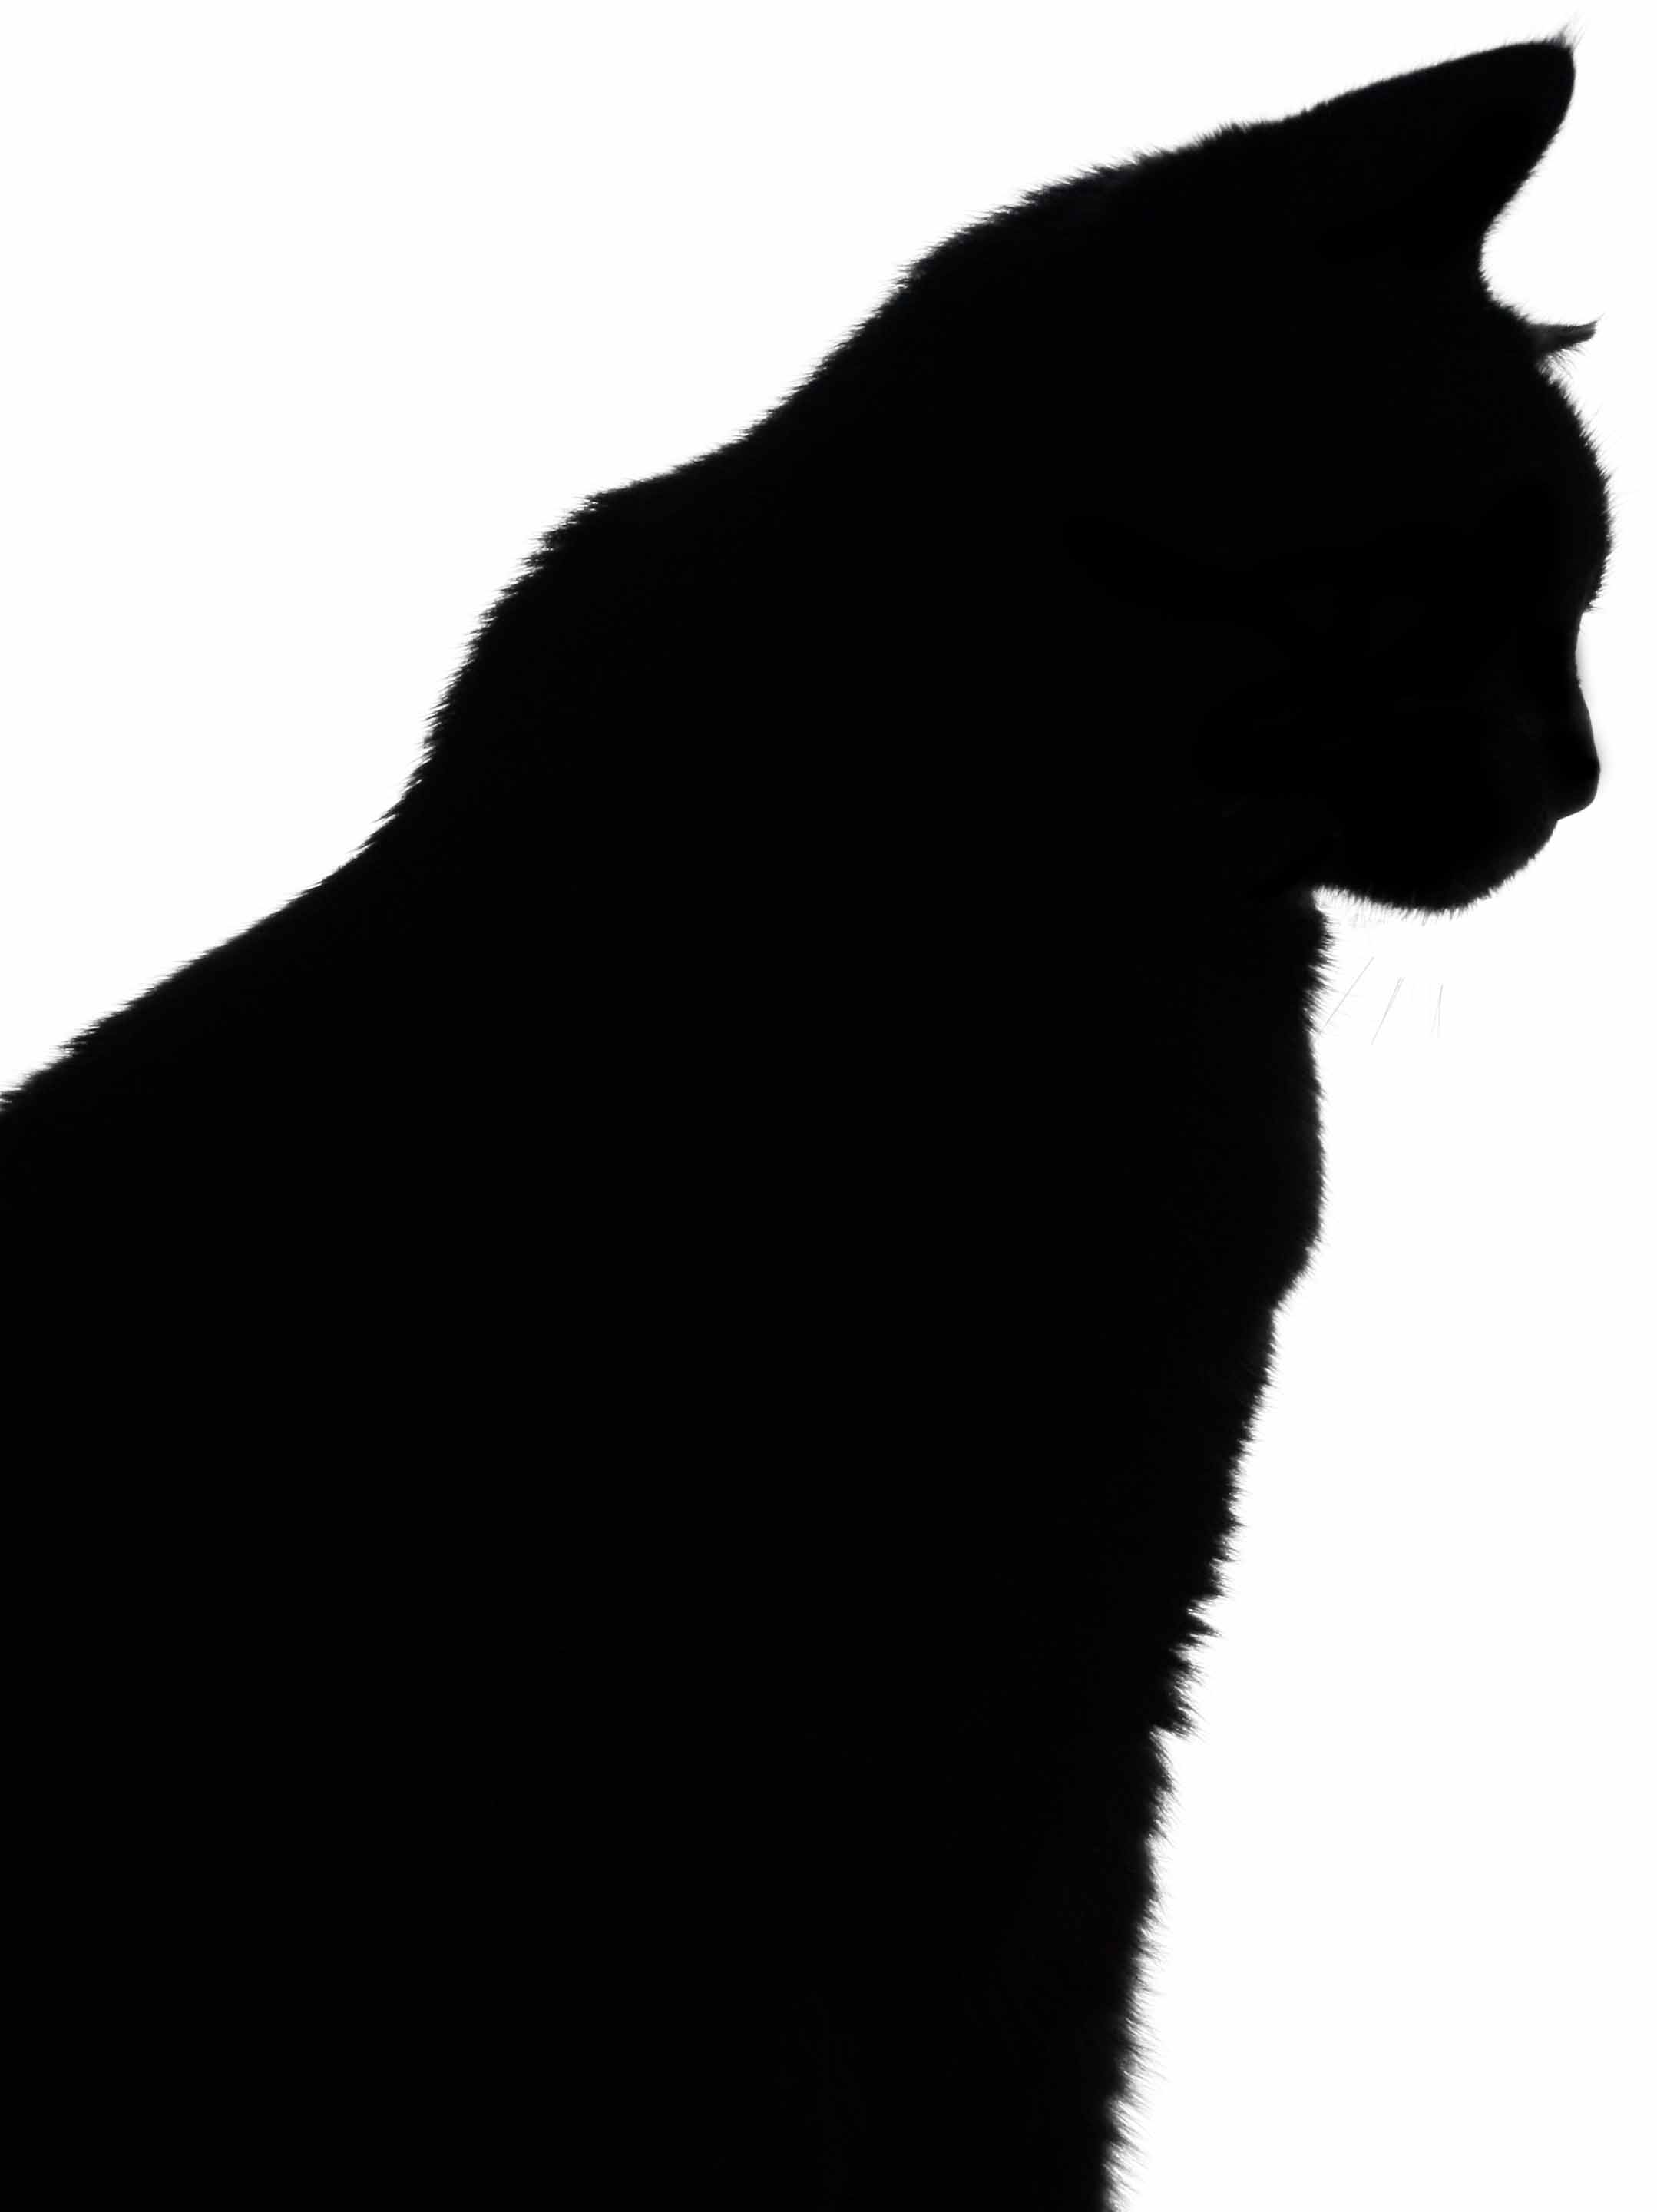 Sleeping Cat Silhouette - Clipart library